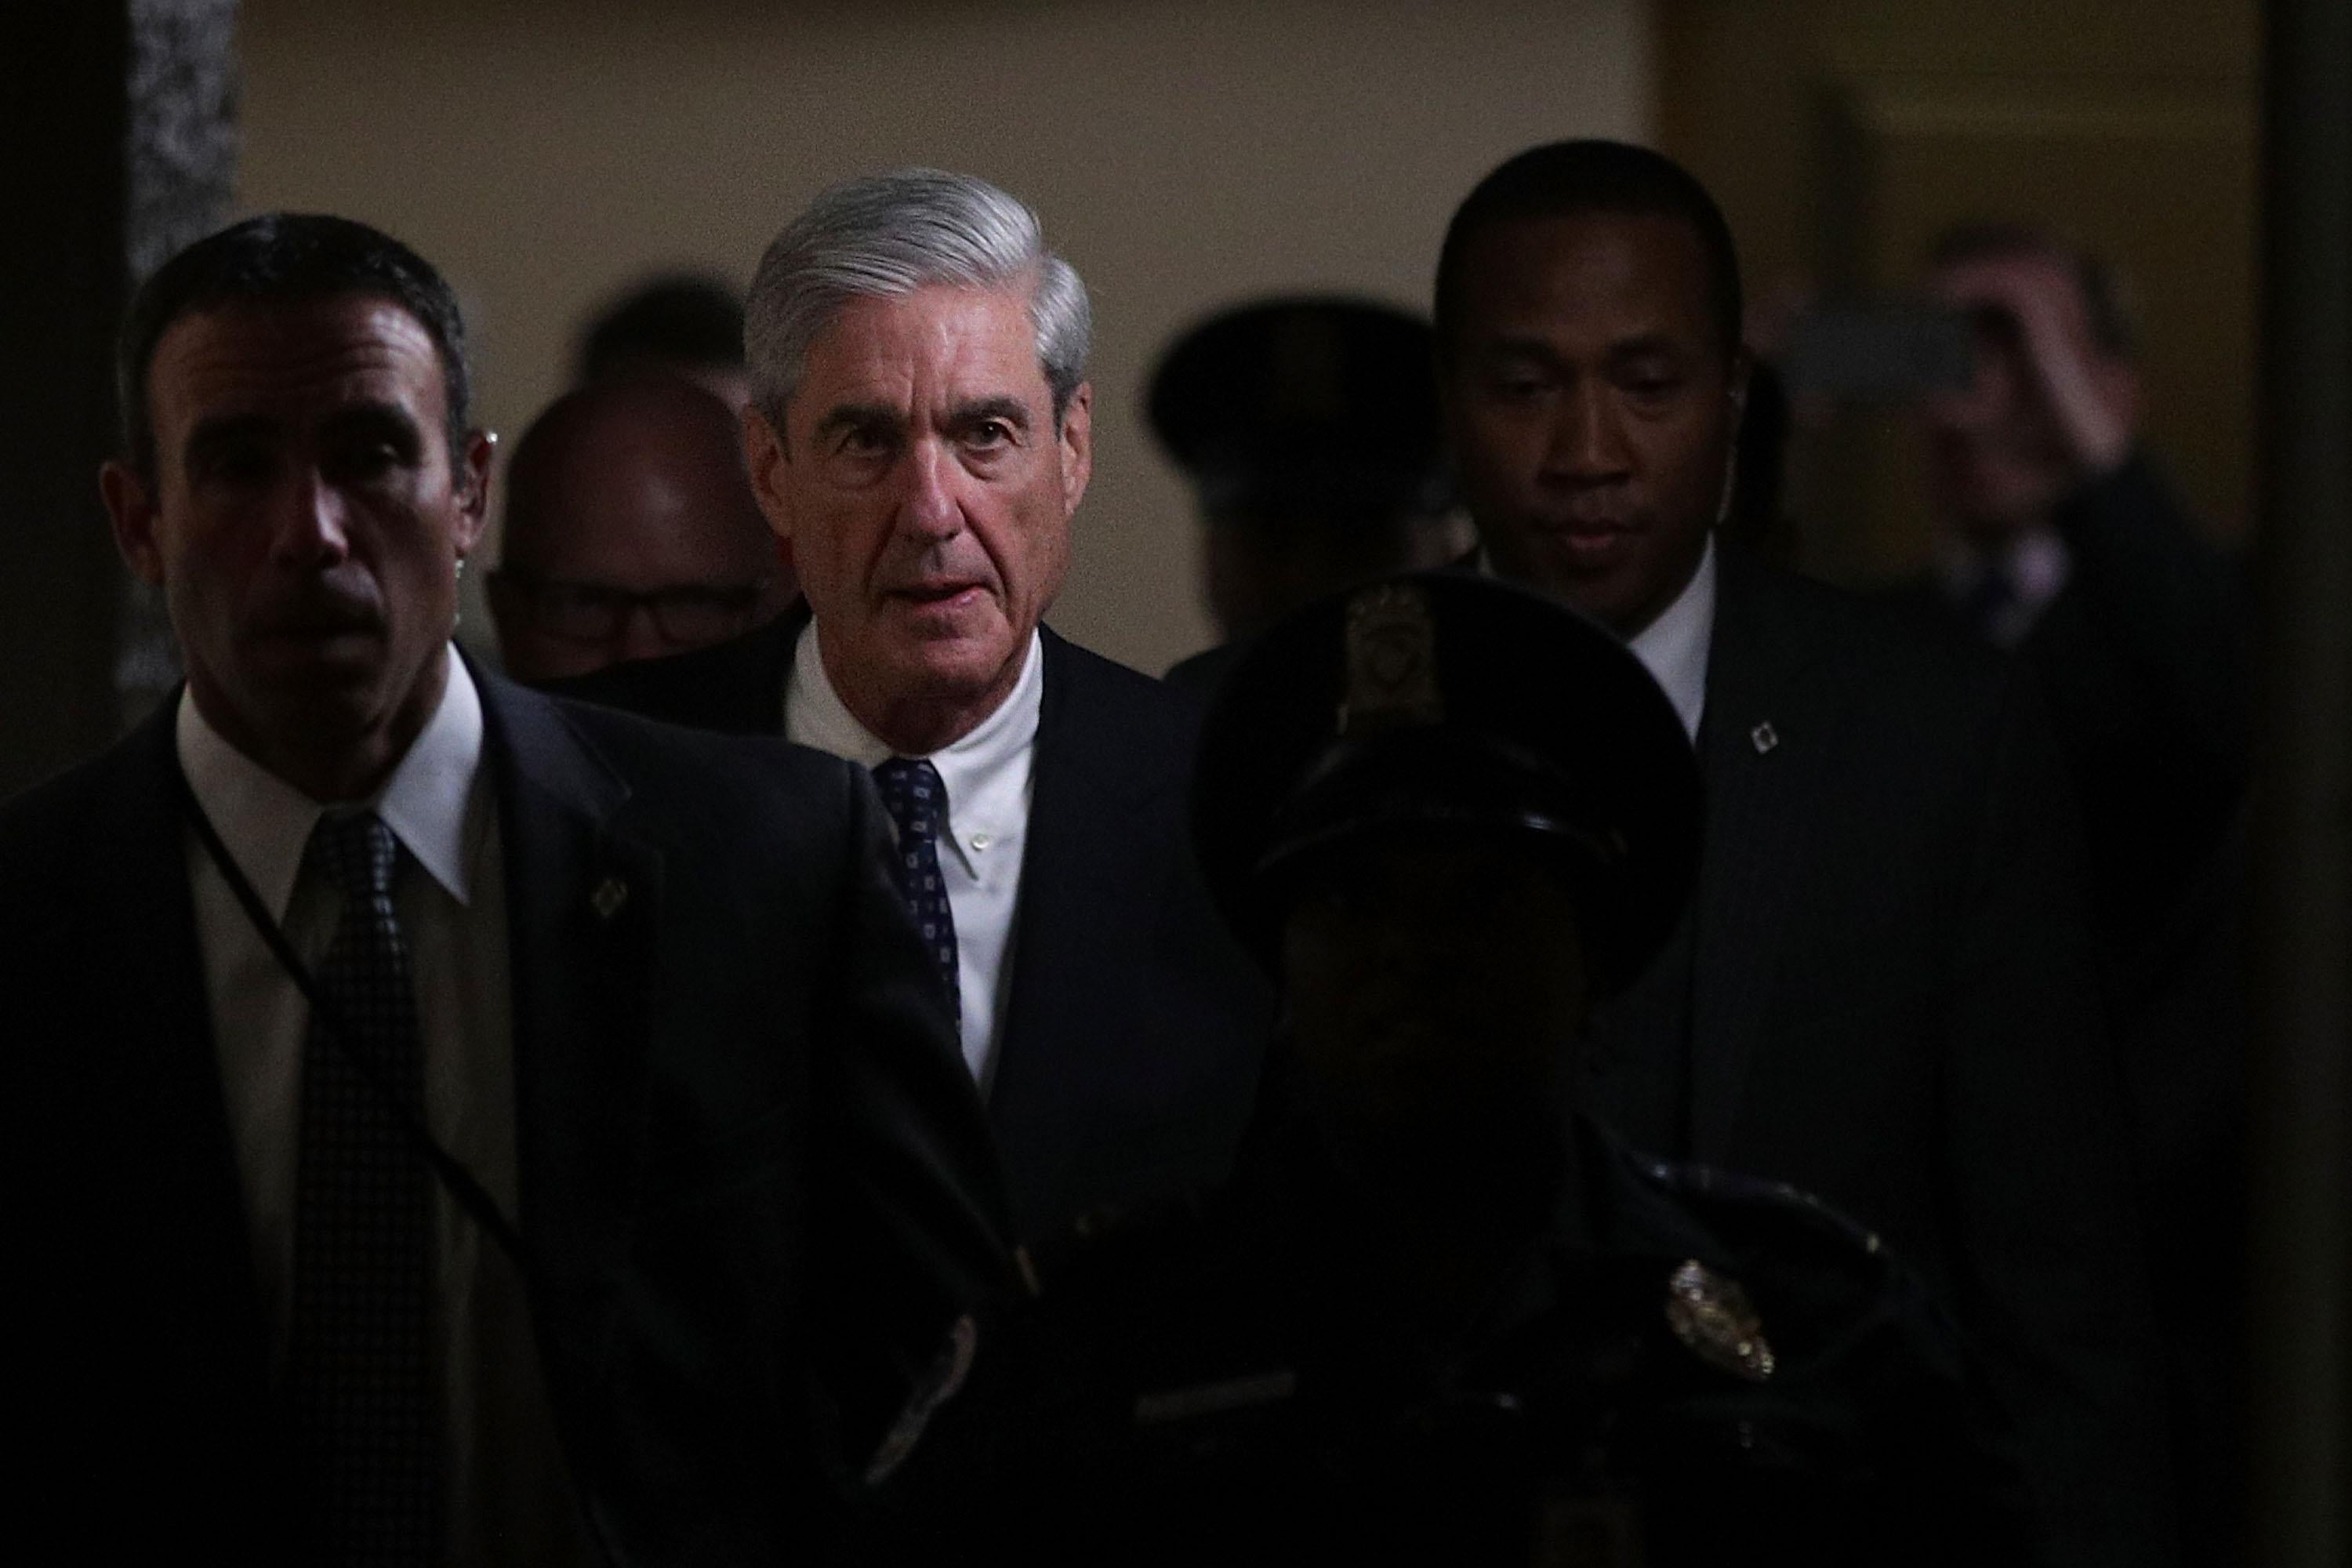 Special counsel Robert Mueller walks down a hallway, surrounded by staffers.